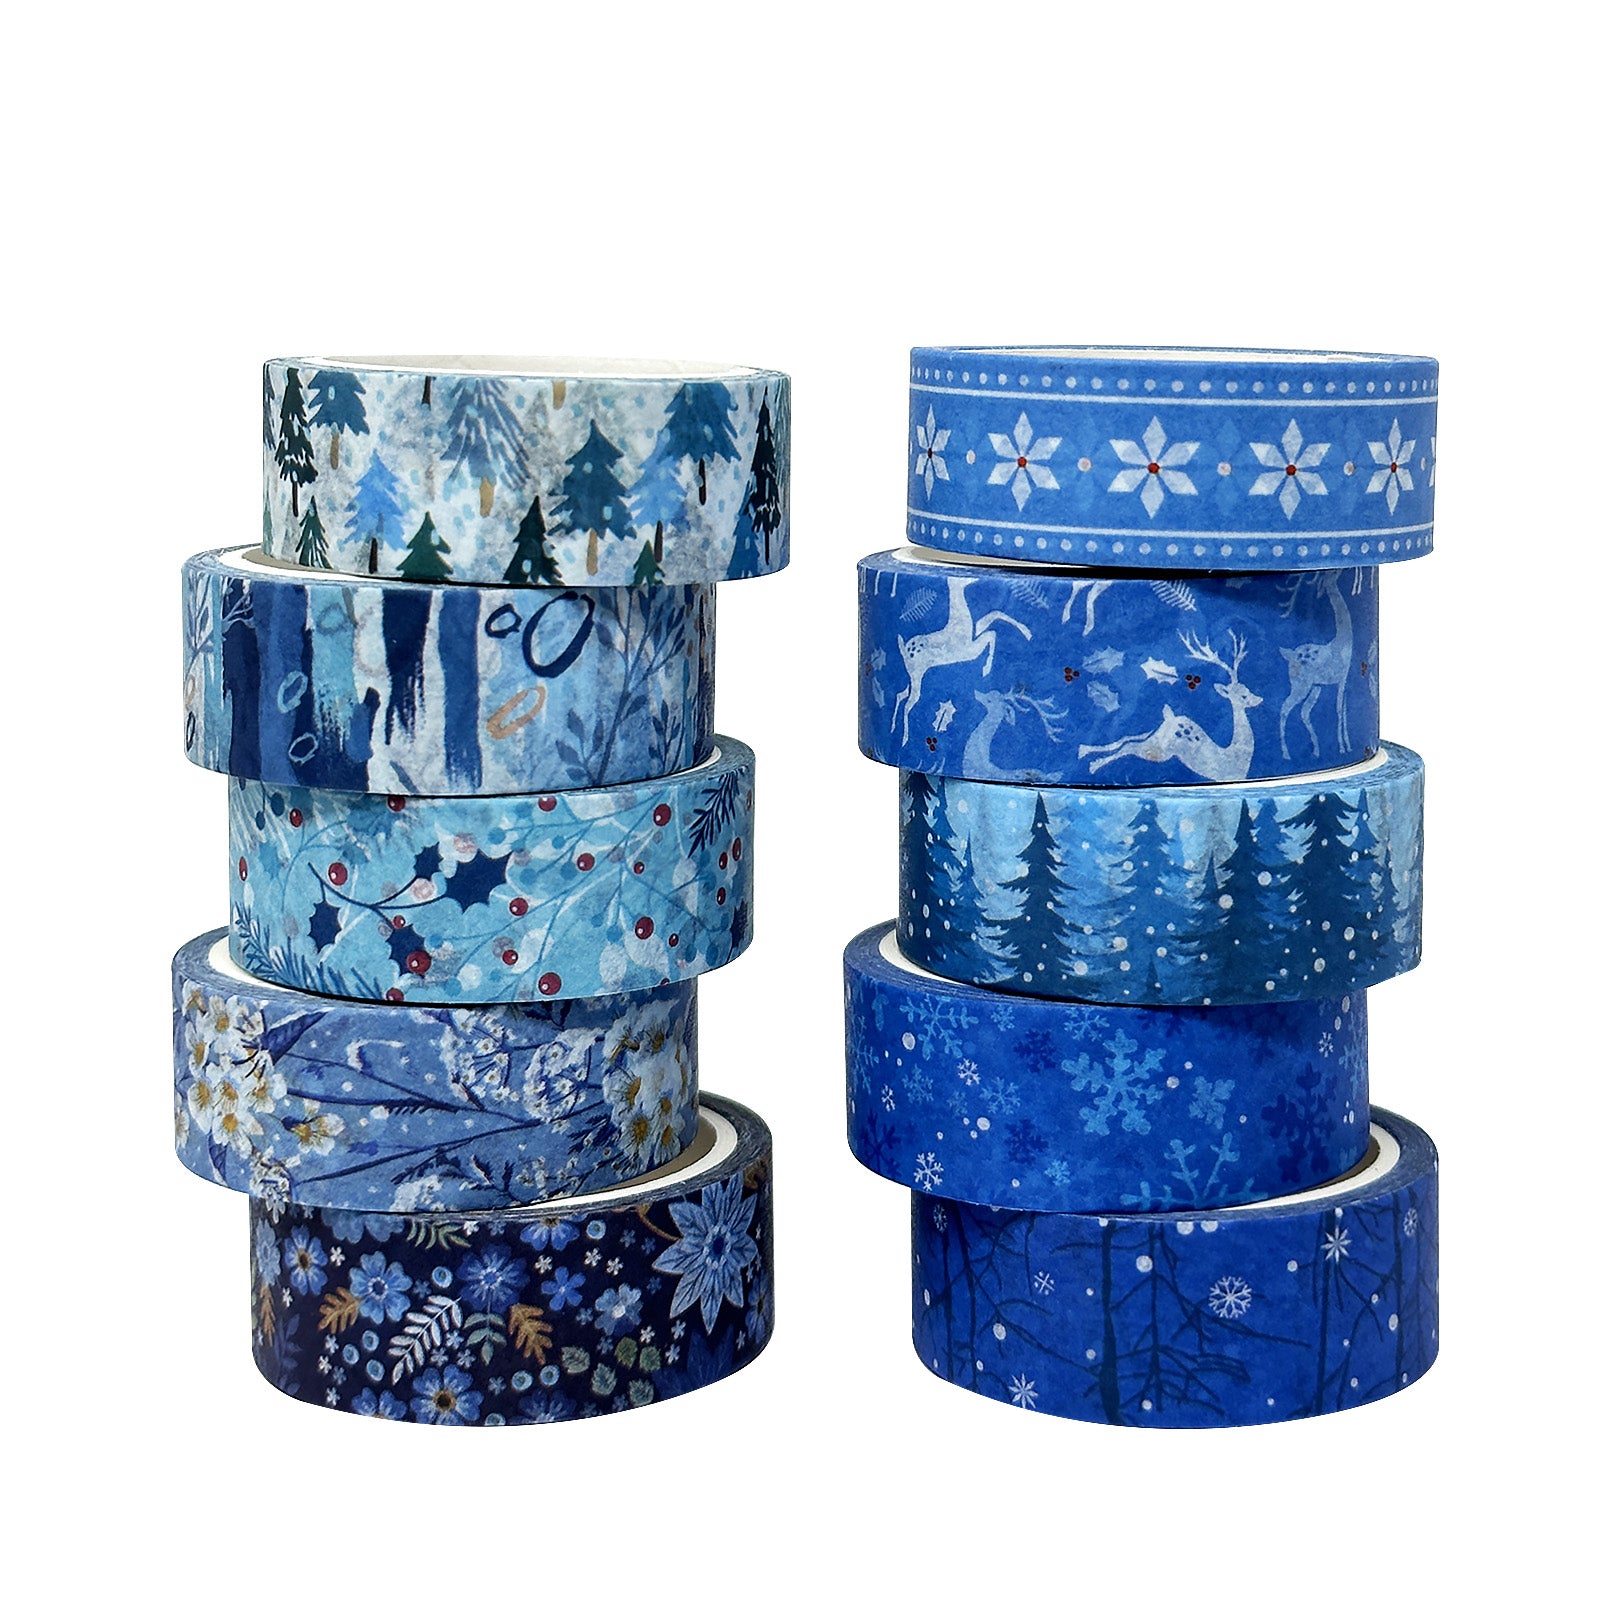 Popiwashi 24 Rolls Holiday Washi Tape Set | Covering Celebrations in All Four Seasons | Multi-Purpose, Great for Adults and Kids; Gift Wra